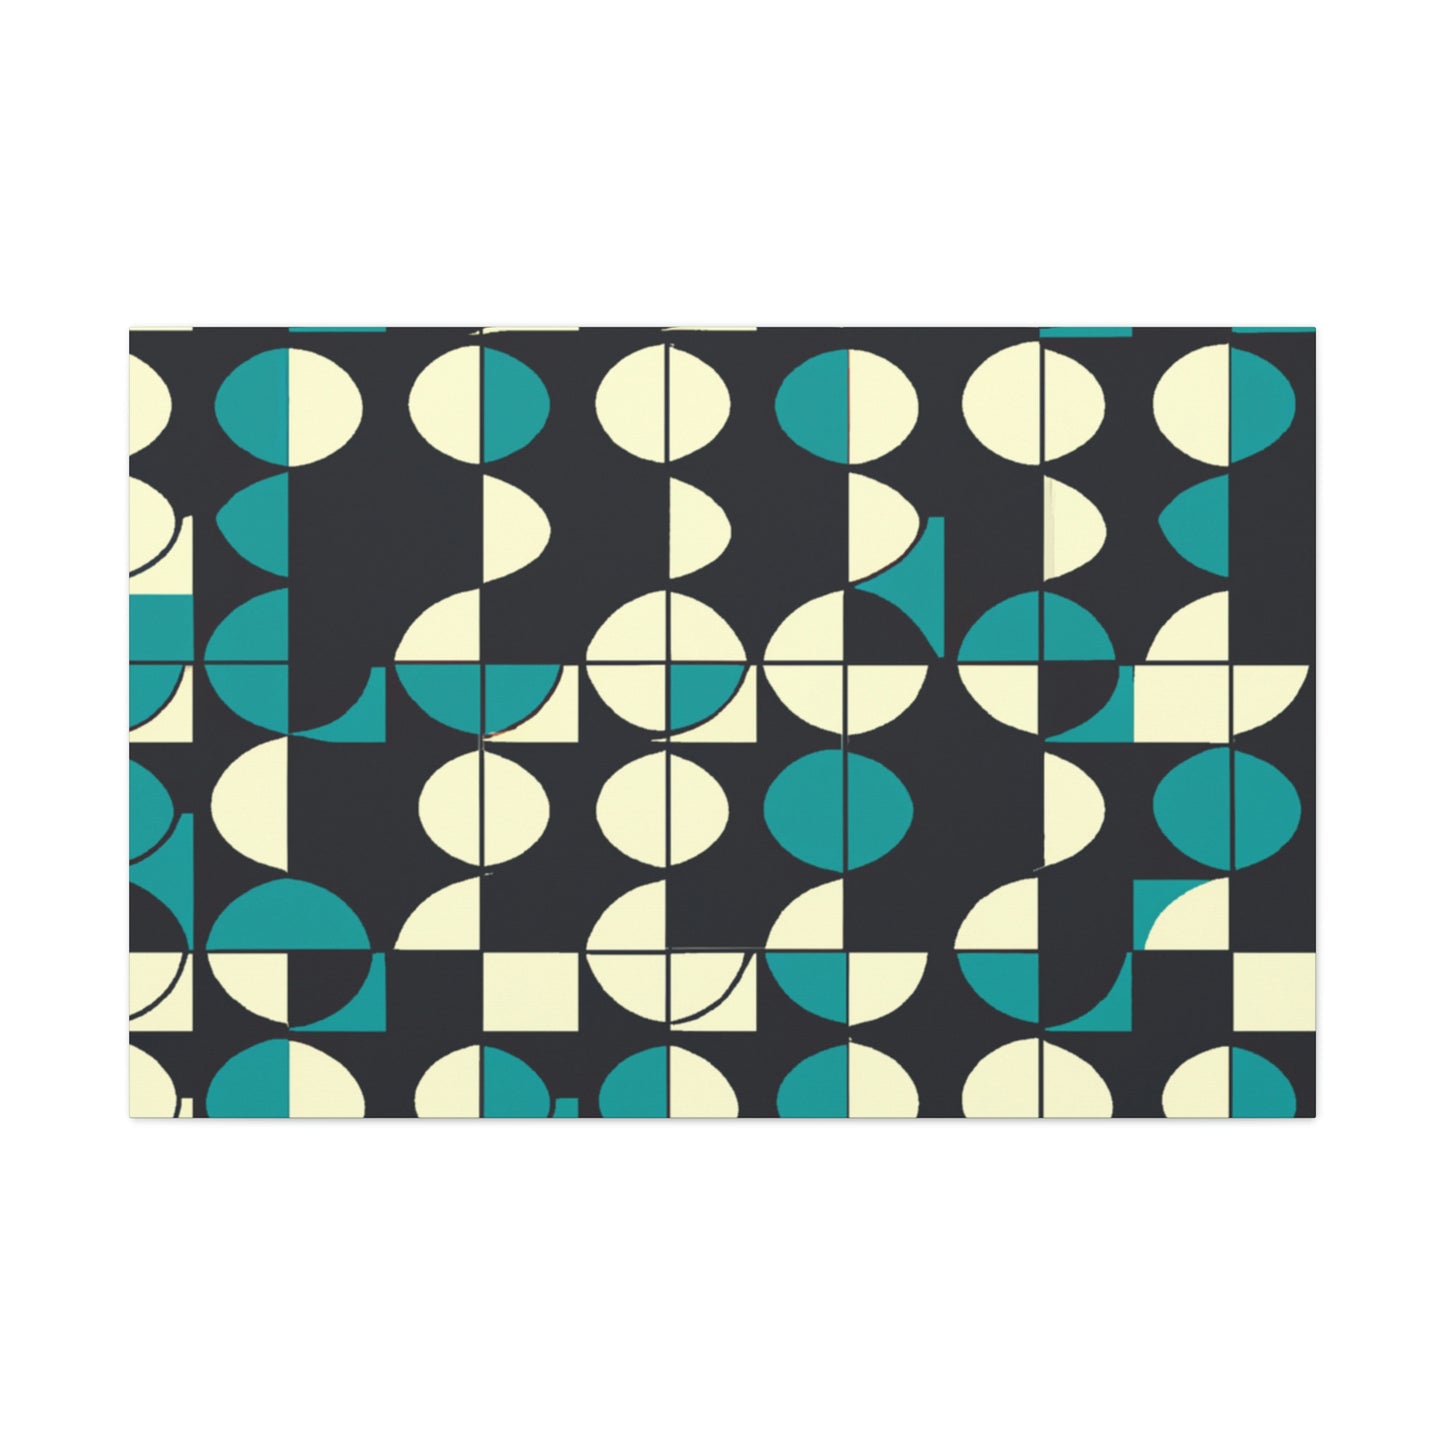 can be tranquility. - Geometric Canvas Wall Art